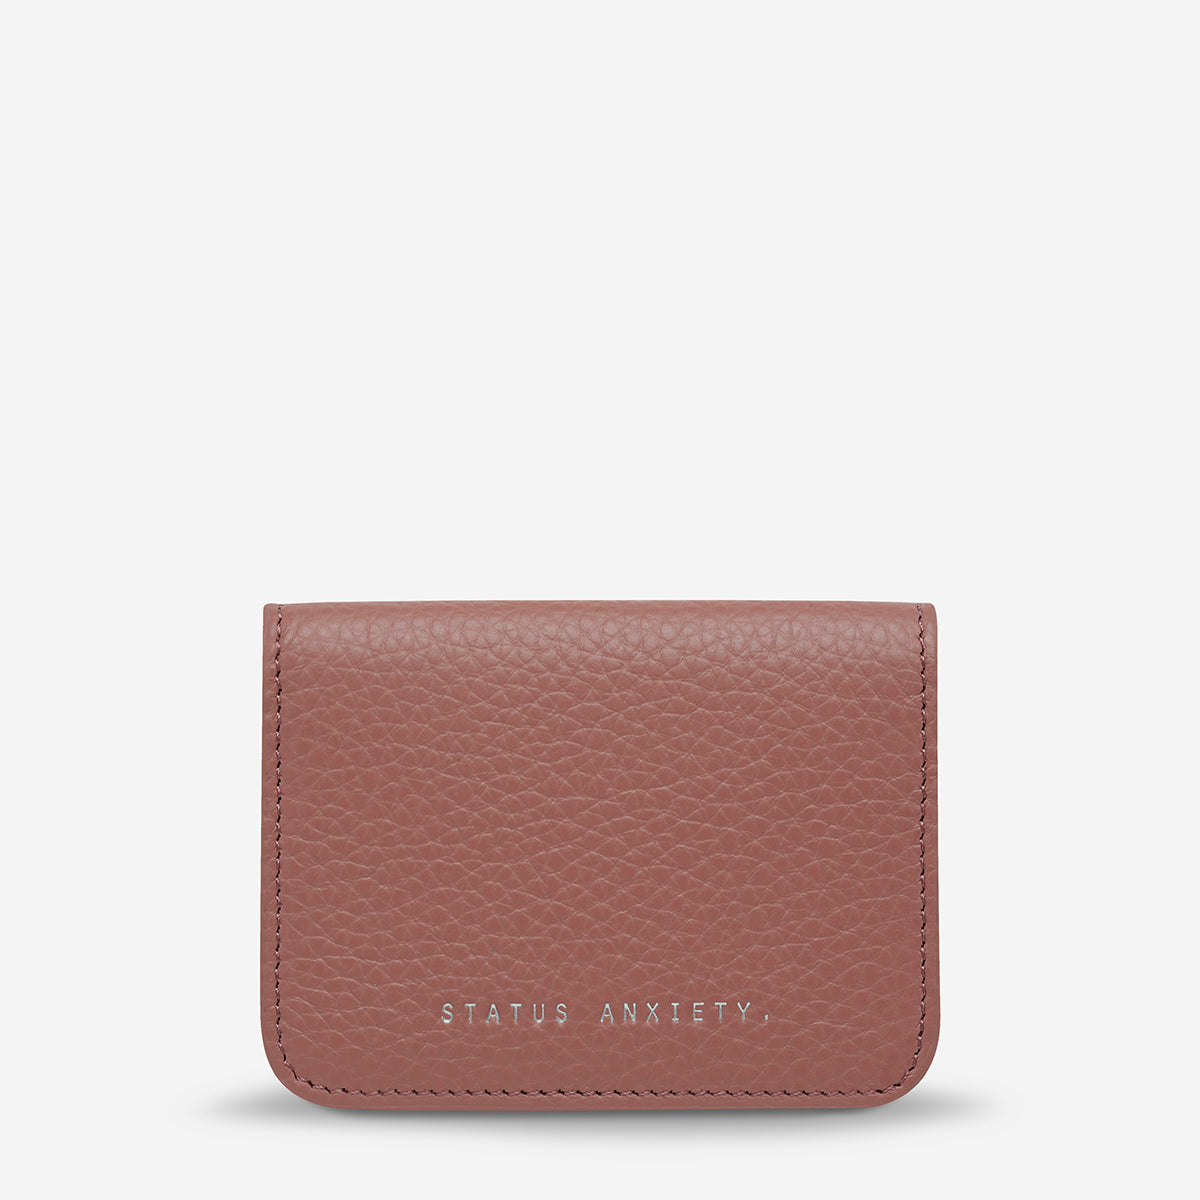 Status Anxiety - Miles Away Wallet - Dusty Rose